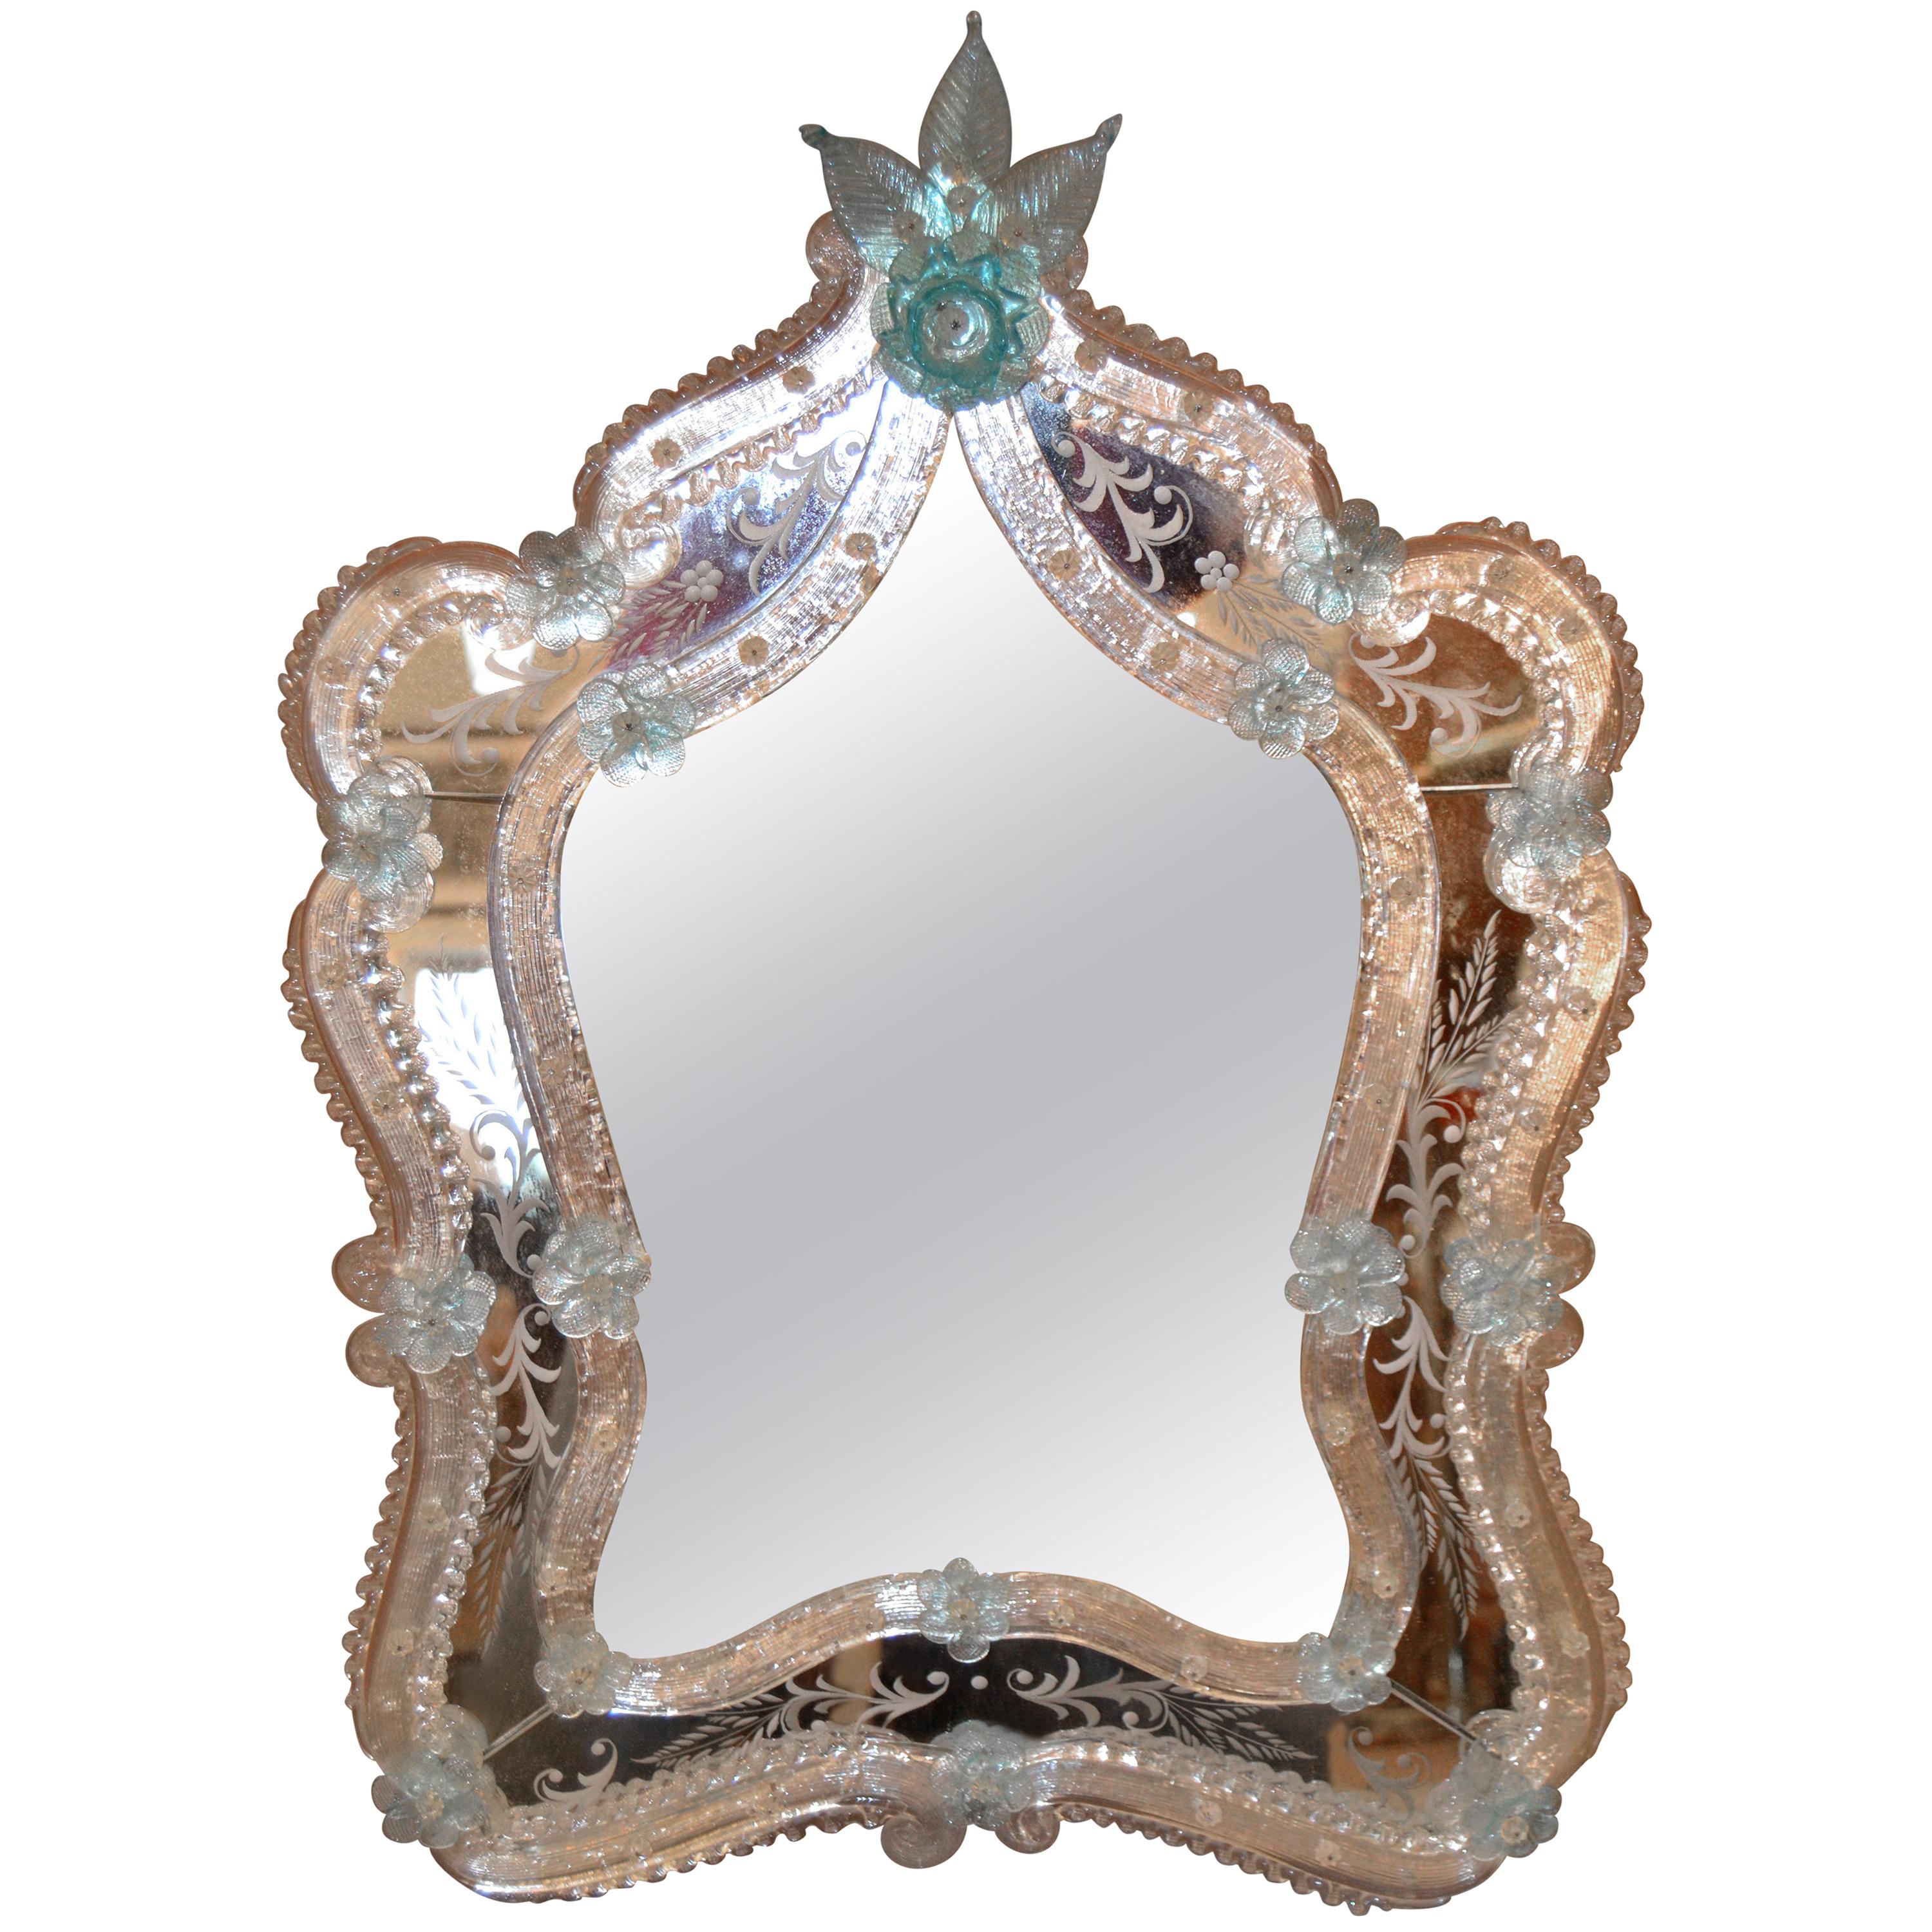 Fratelli Tosi Venetian Glass Vanity, Table Mirror with Blue Flowers, Italy